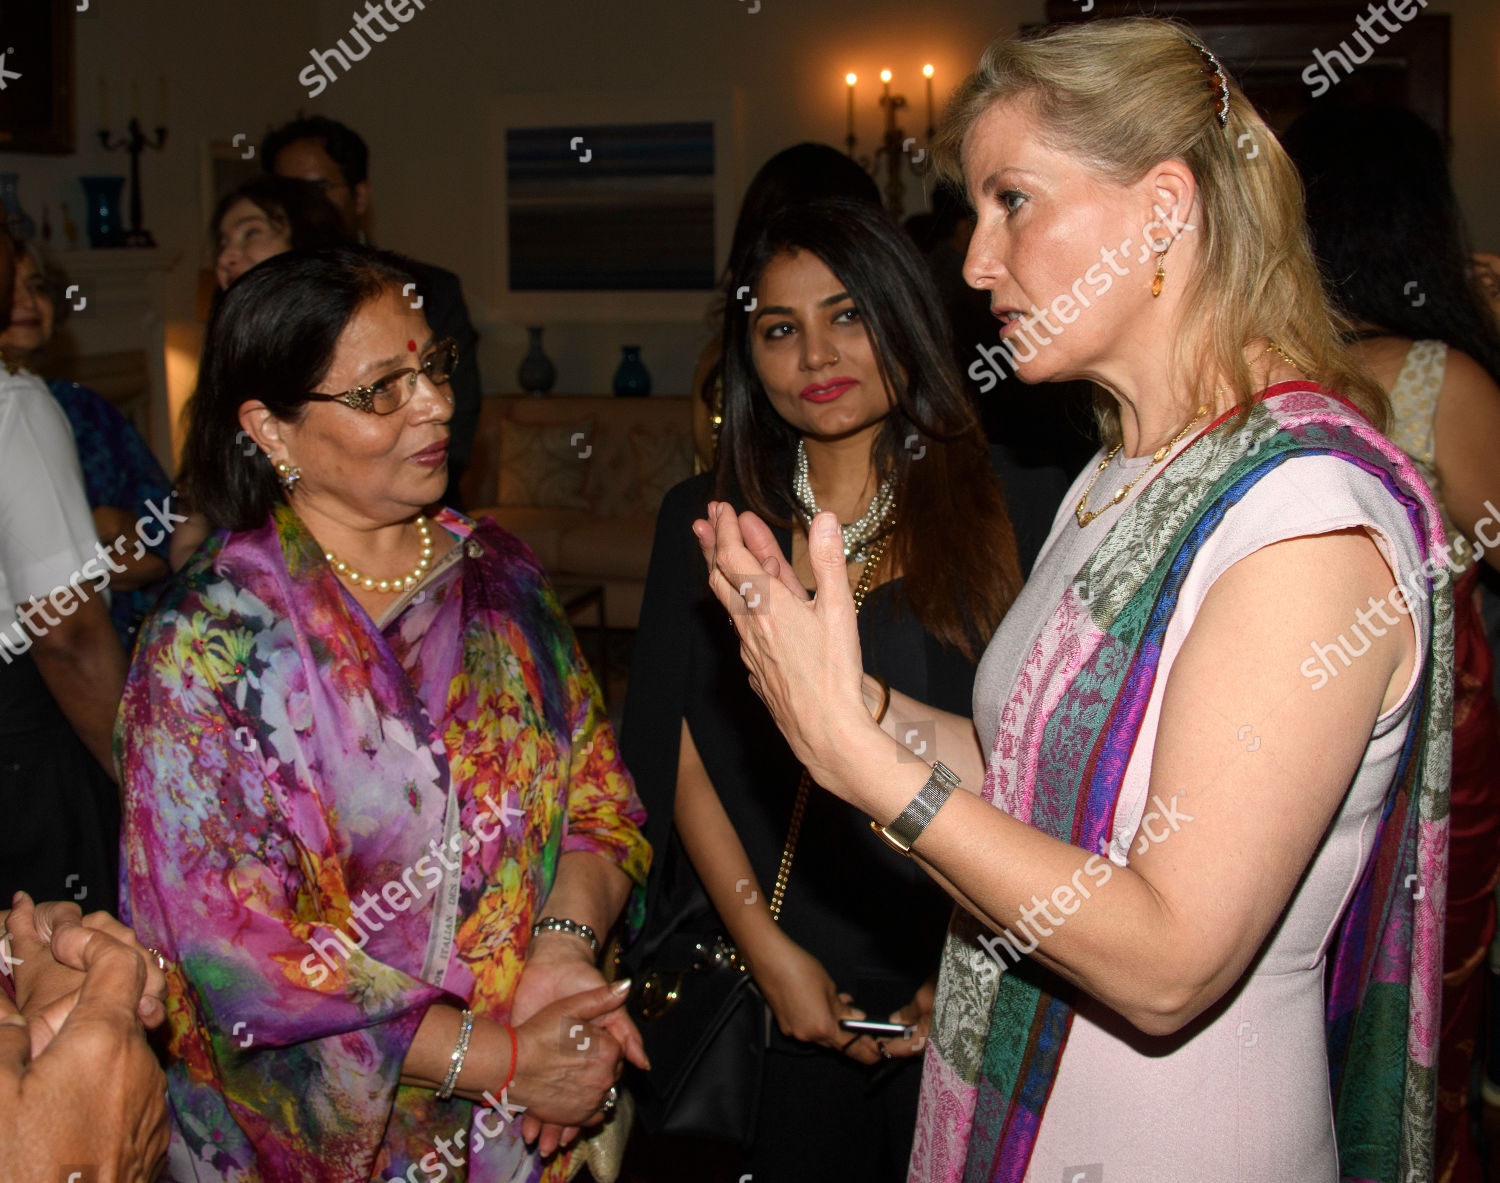 sophie-countess-of-wessex-visit-to-india-shutterstock-editorial-10226793x.jpg